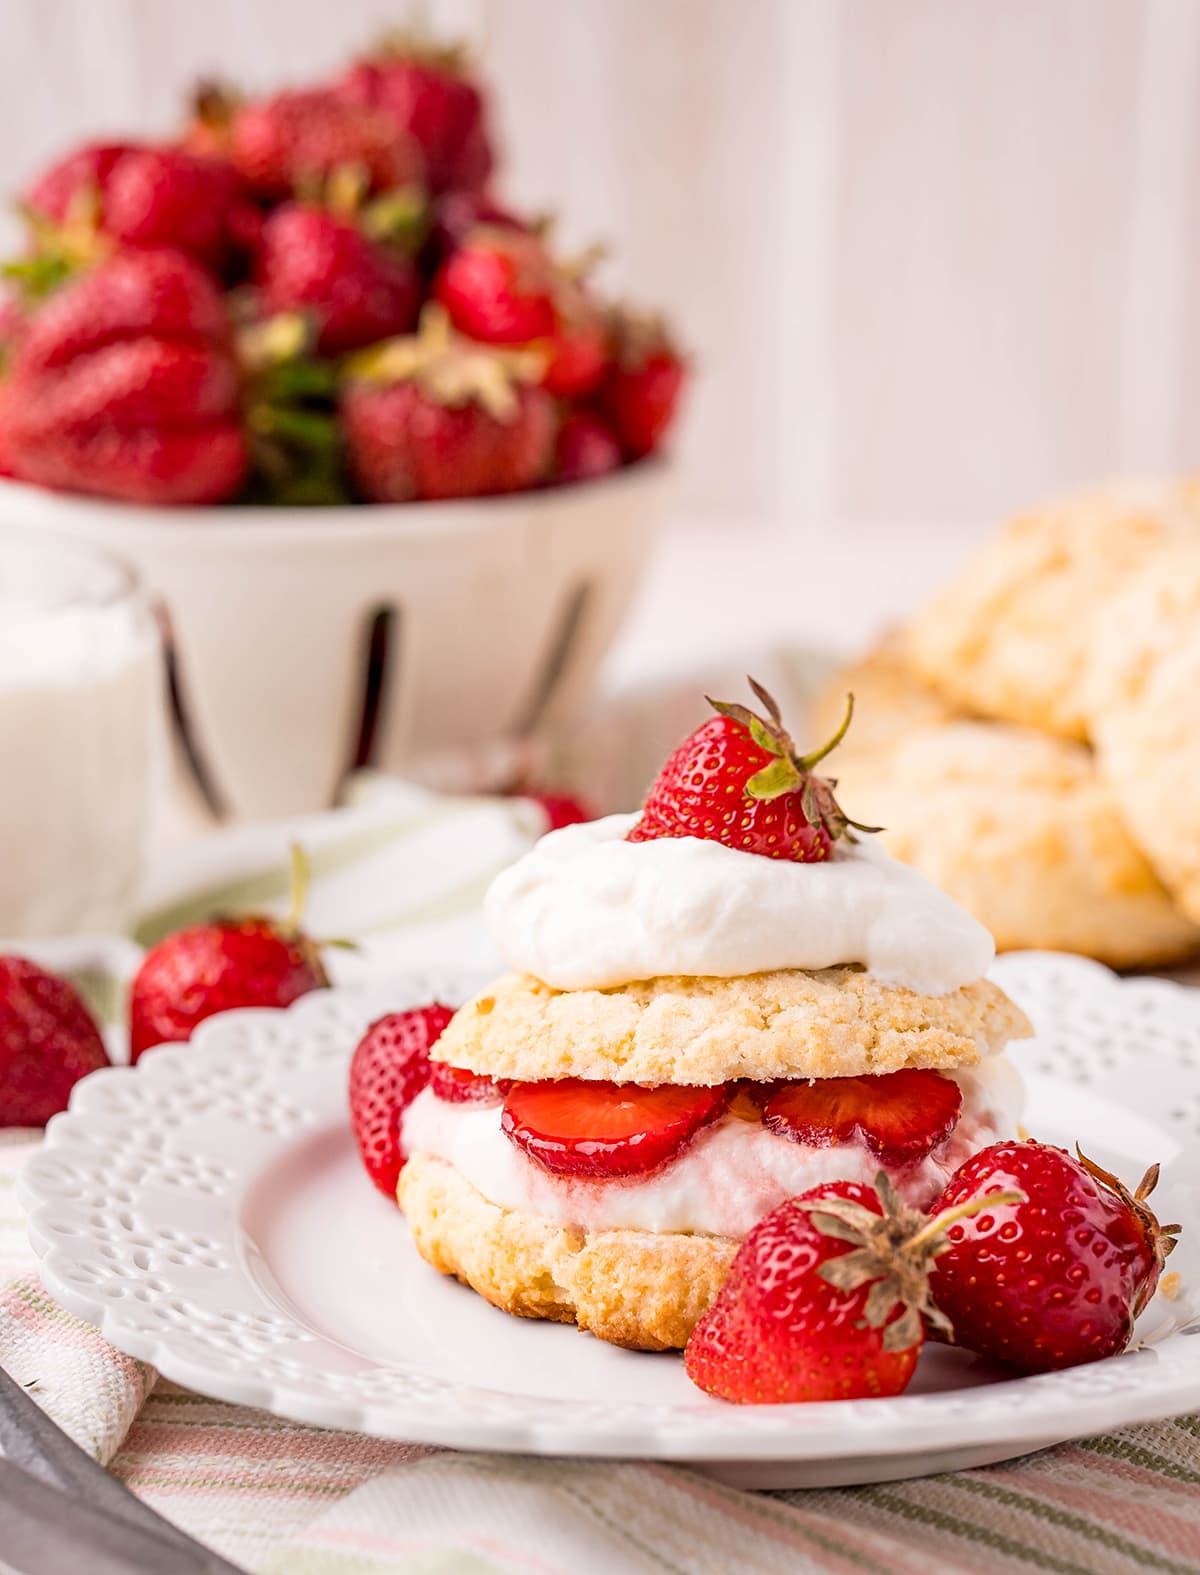 A strawberry shortcake biscuit with strawberries on a plate.